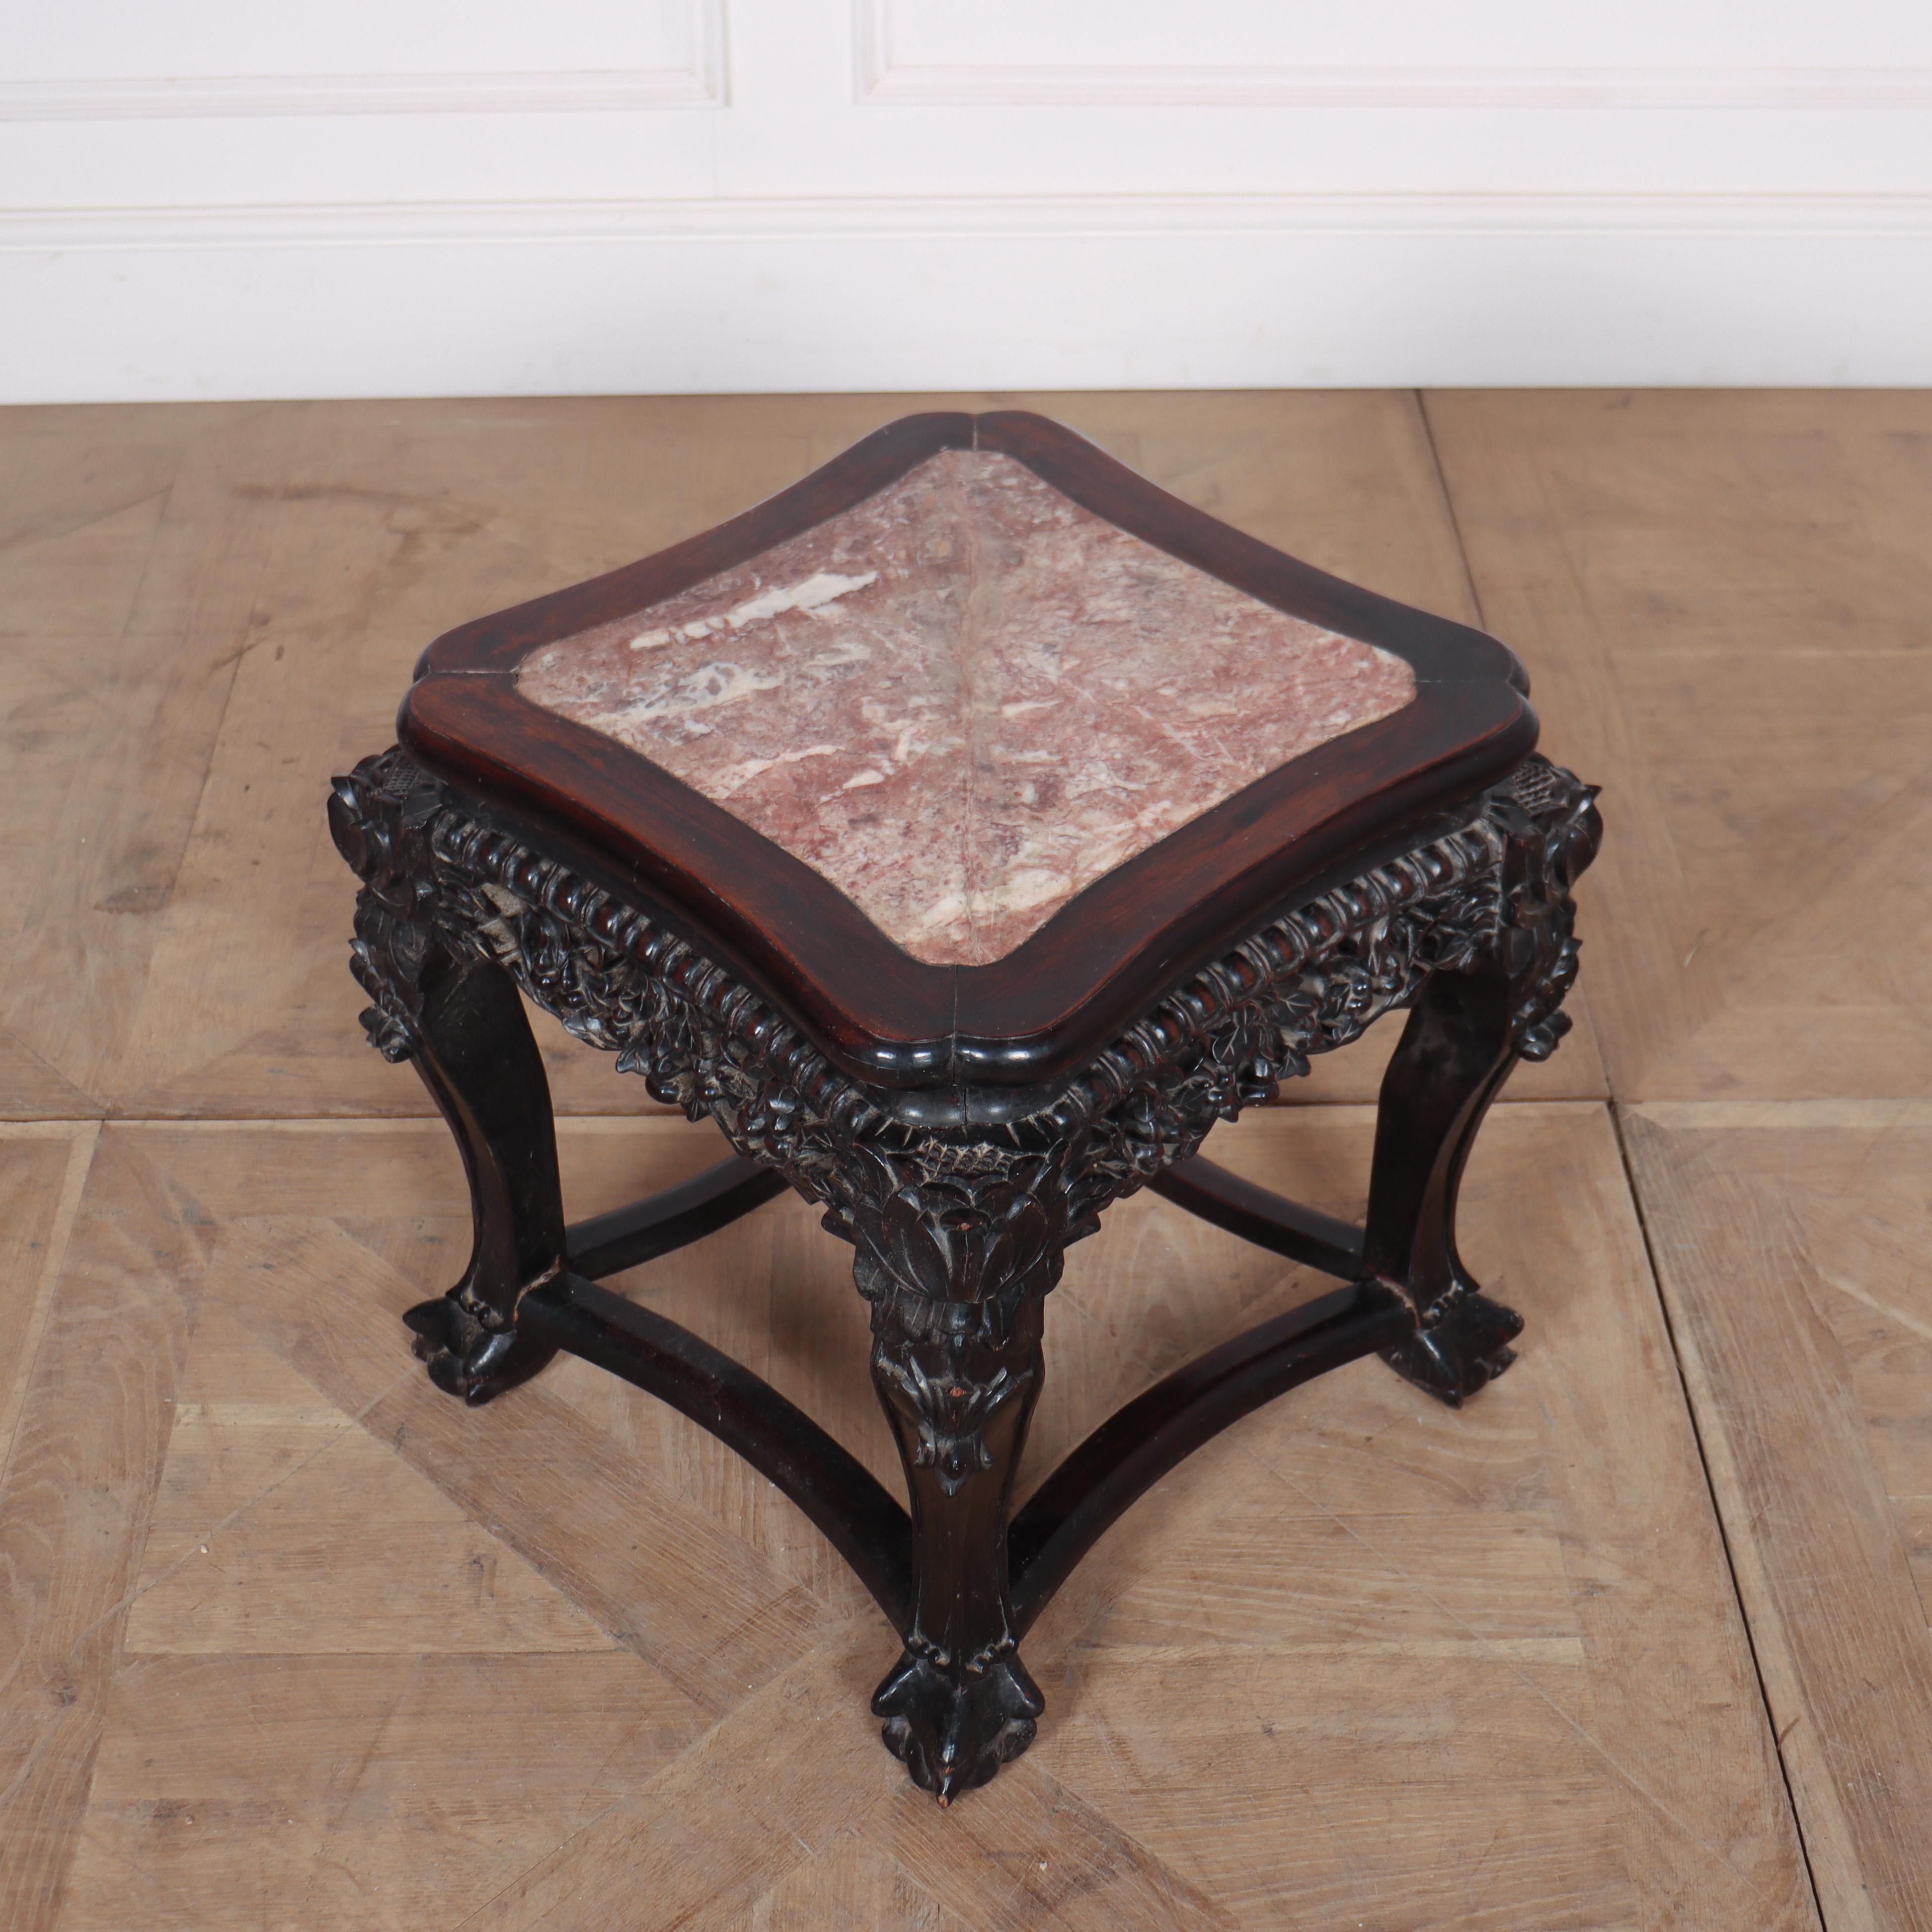 Late 19th C Chinese carved elm and marble side table. 1890

Reference: 7941

Dimensions
17 inches (43 cms) Wide
17 inches (43 cms) Deep
18.5 inches (47 cms) High